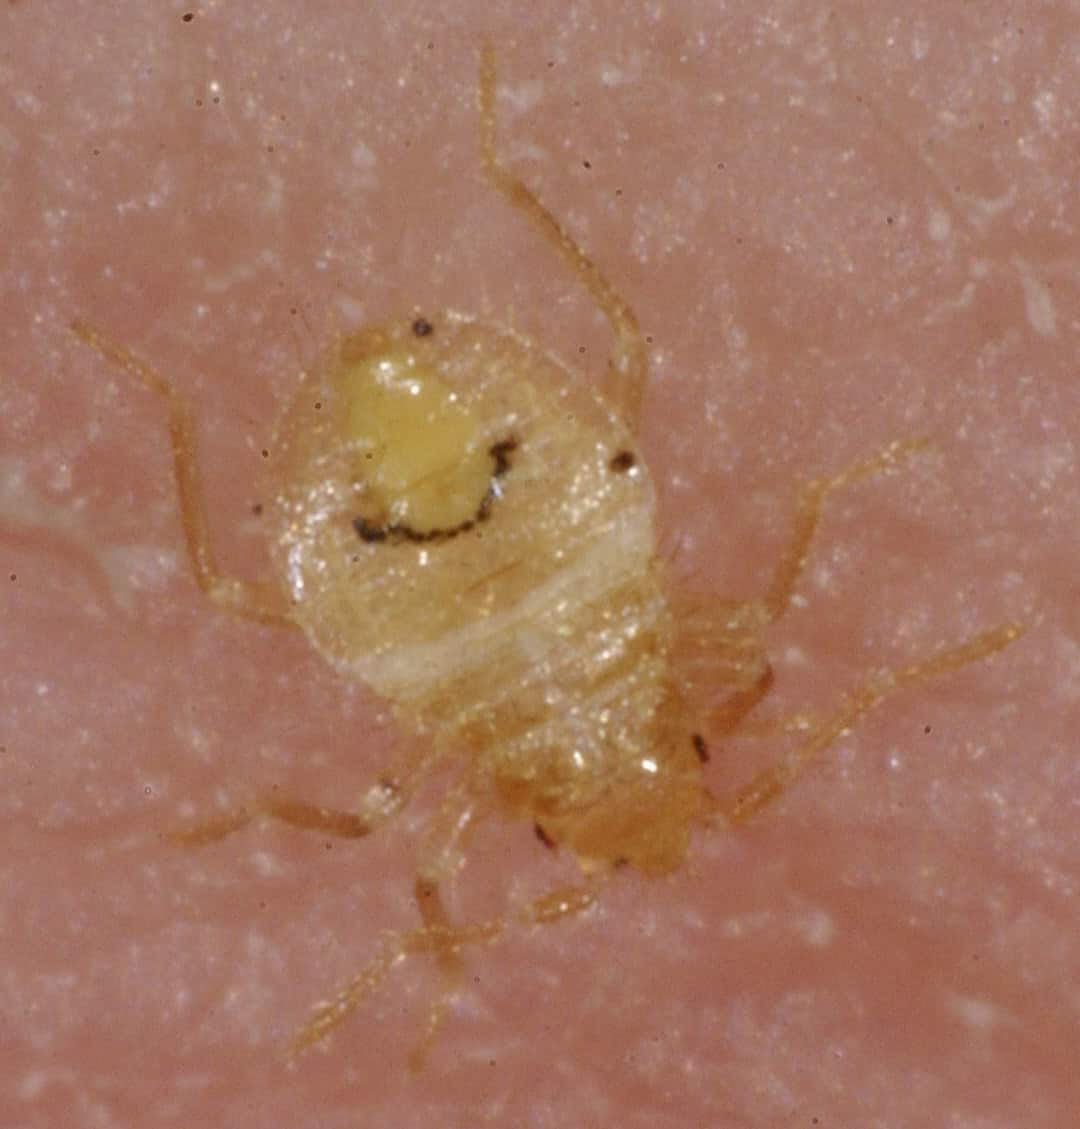 baby bed bugs